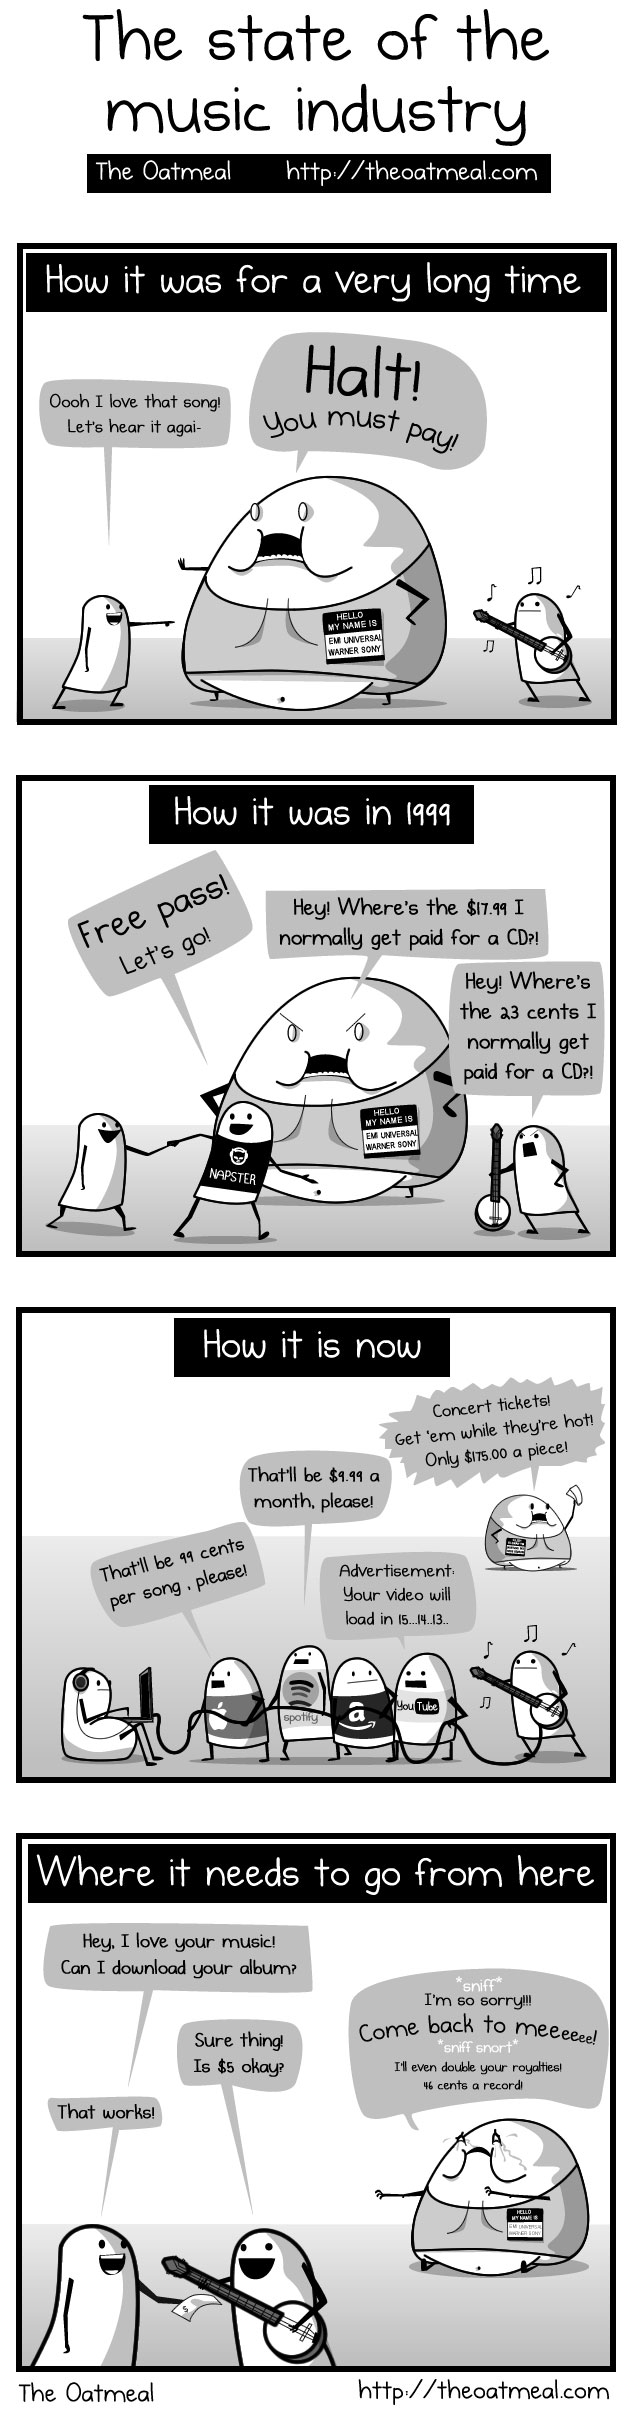 the state of the music industry as told by the oatmeal